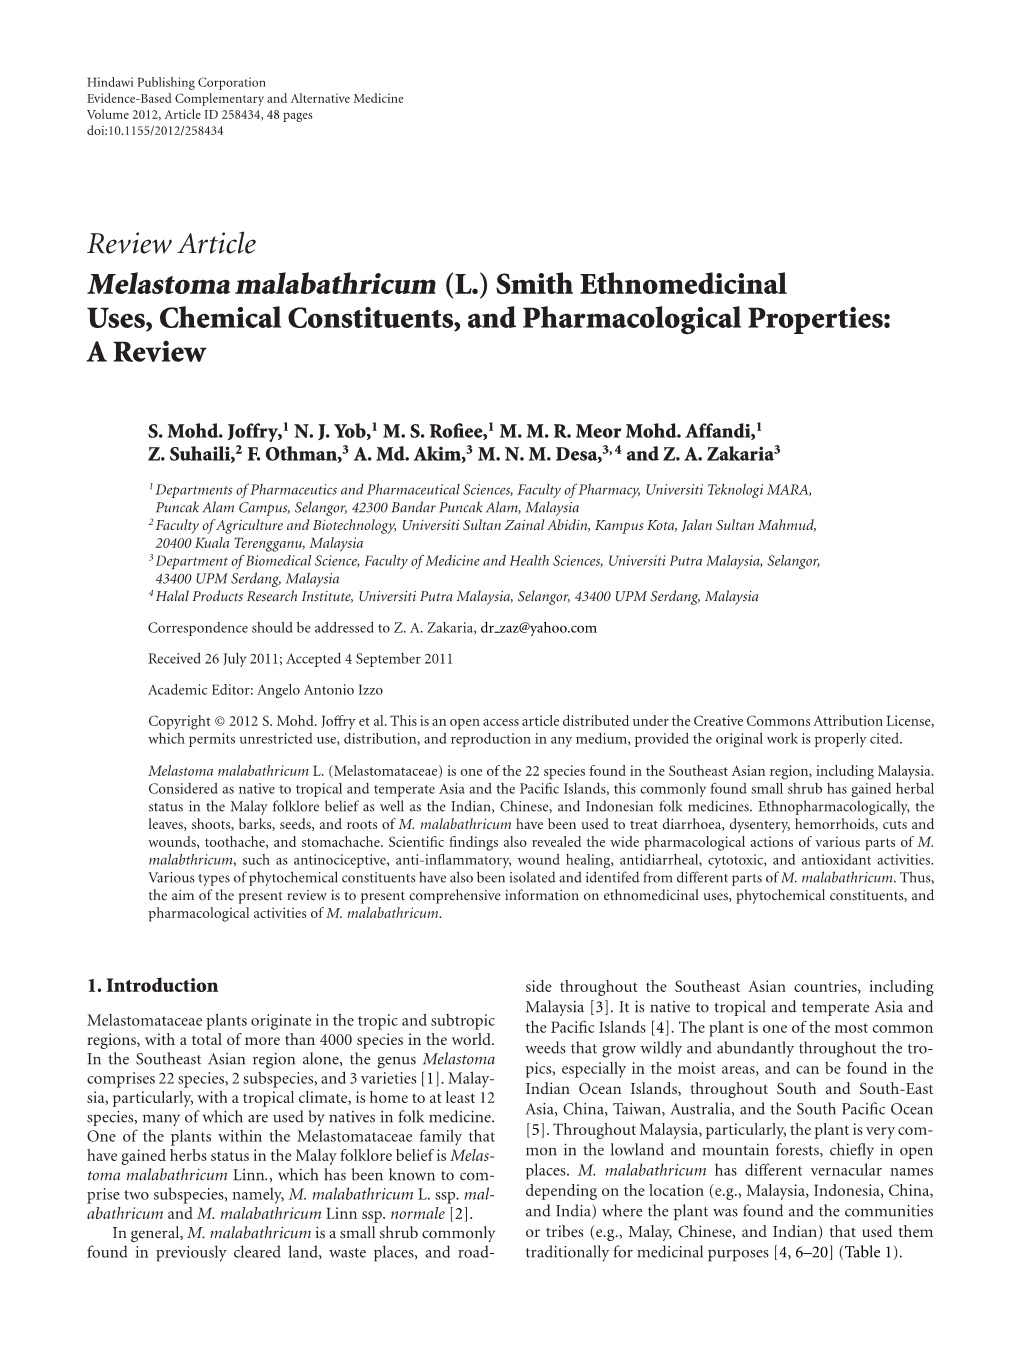 Melastoma Malabathricum (L.) Smith Ethnomedicinal Uses, Chemical Constituents, and Pharmacological Properties: a Review